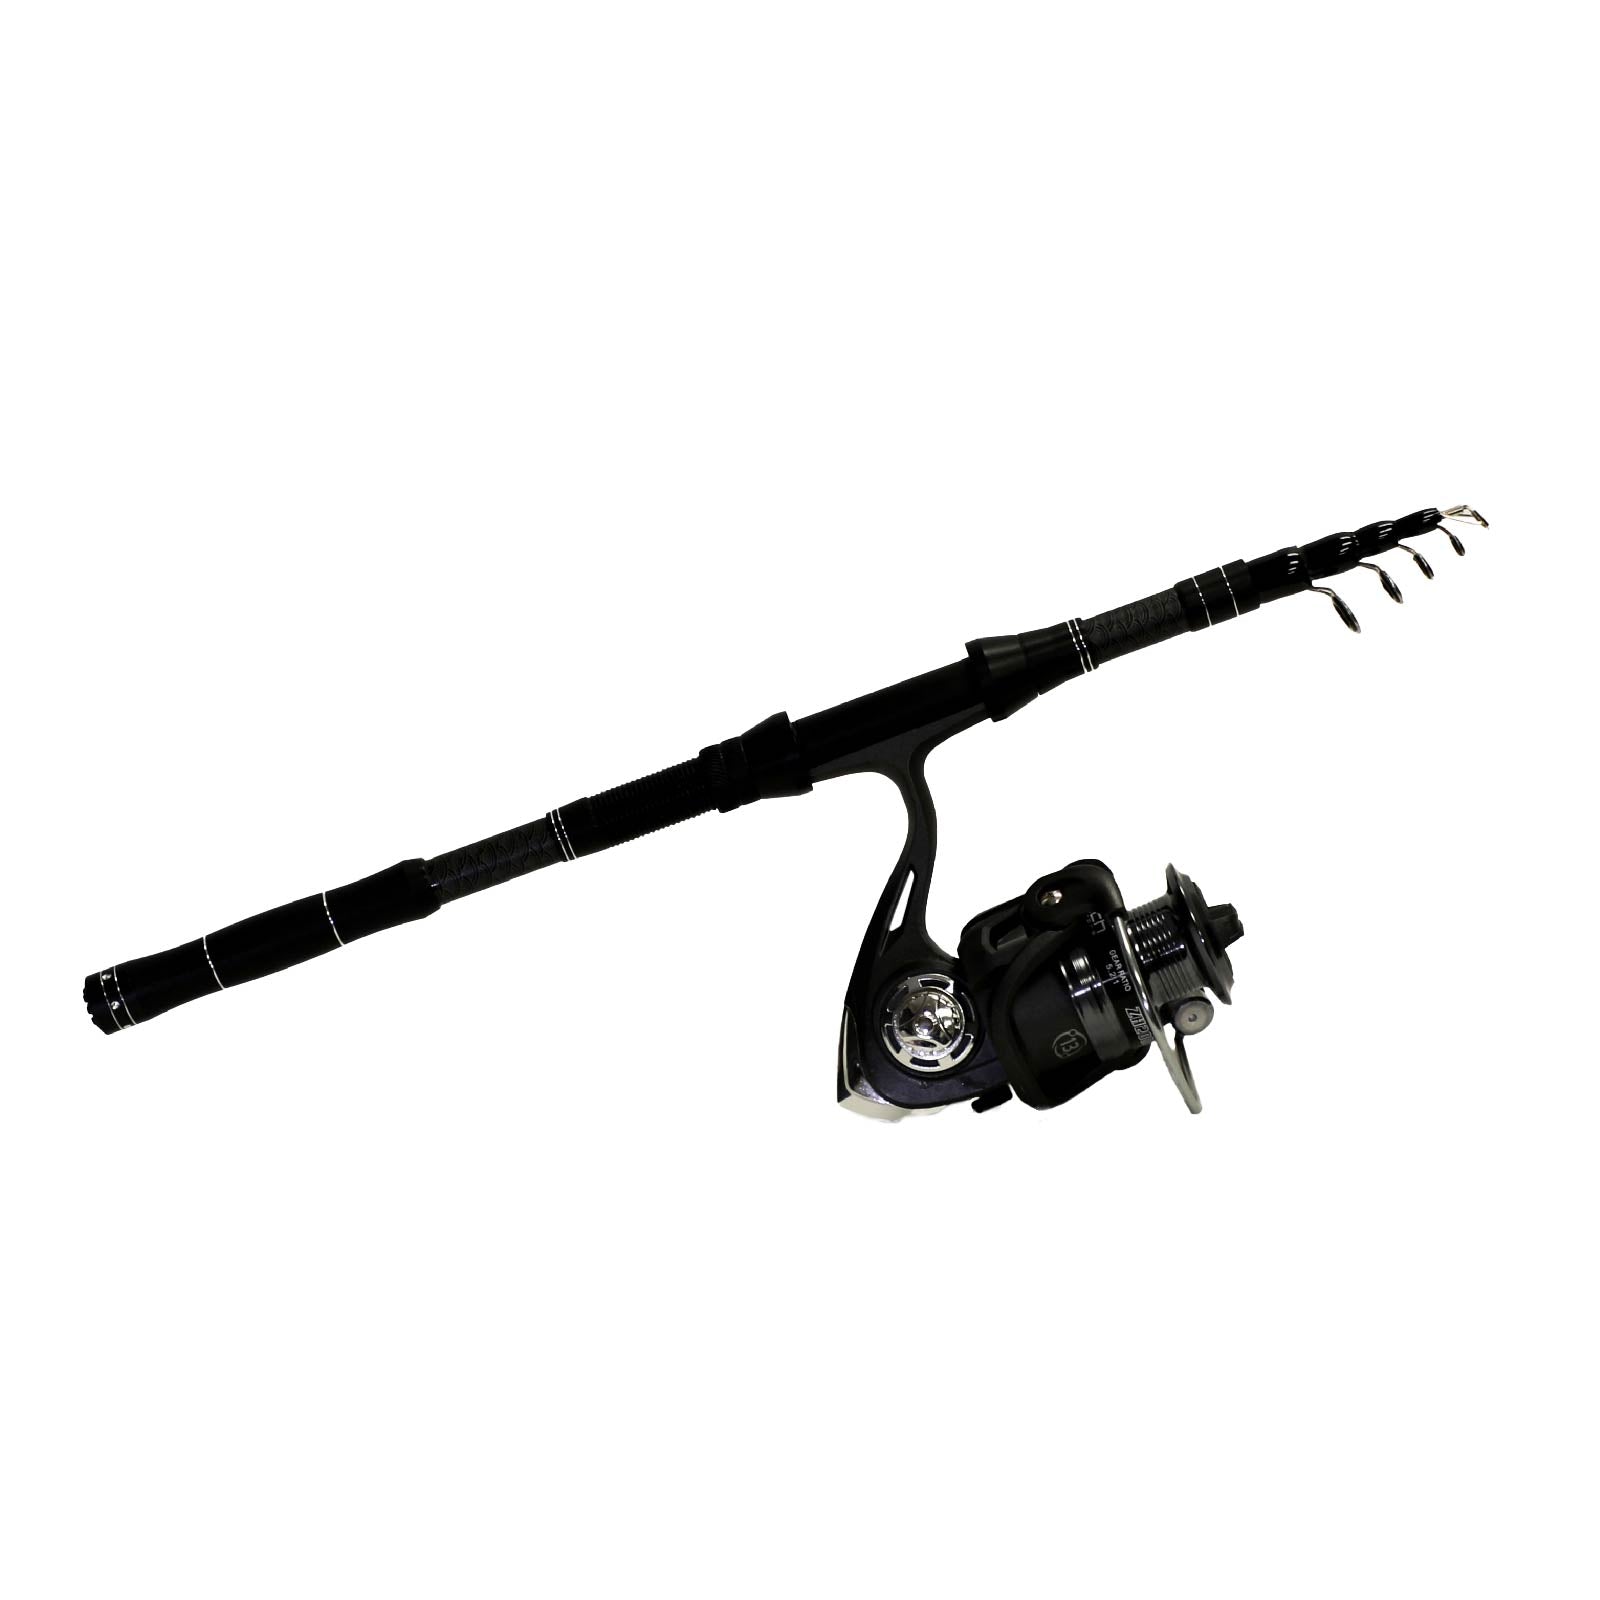 telescopic fishing pole, telescopic fishing pole Suppliers and